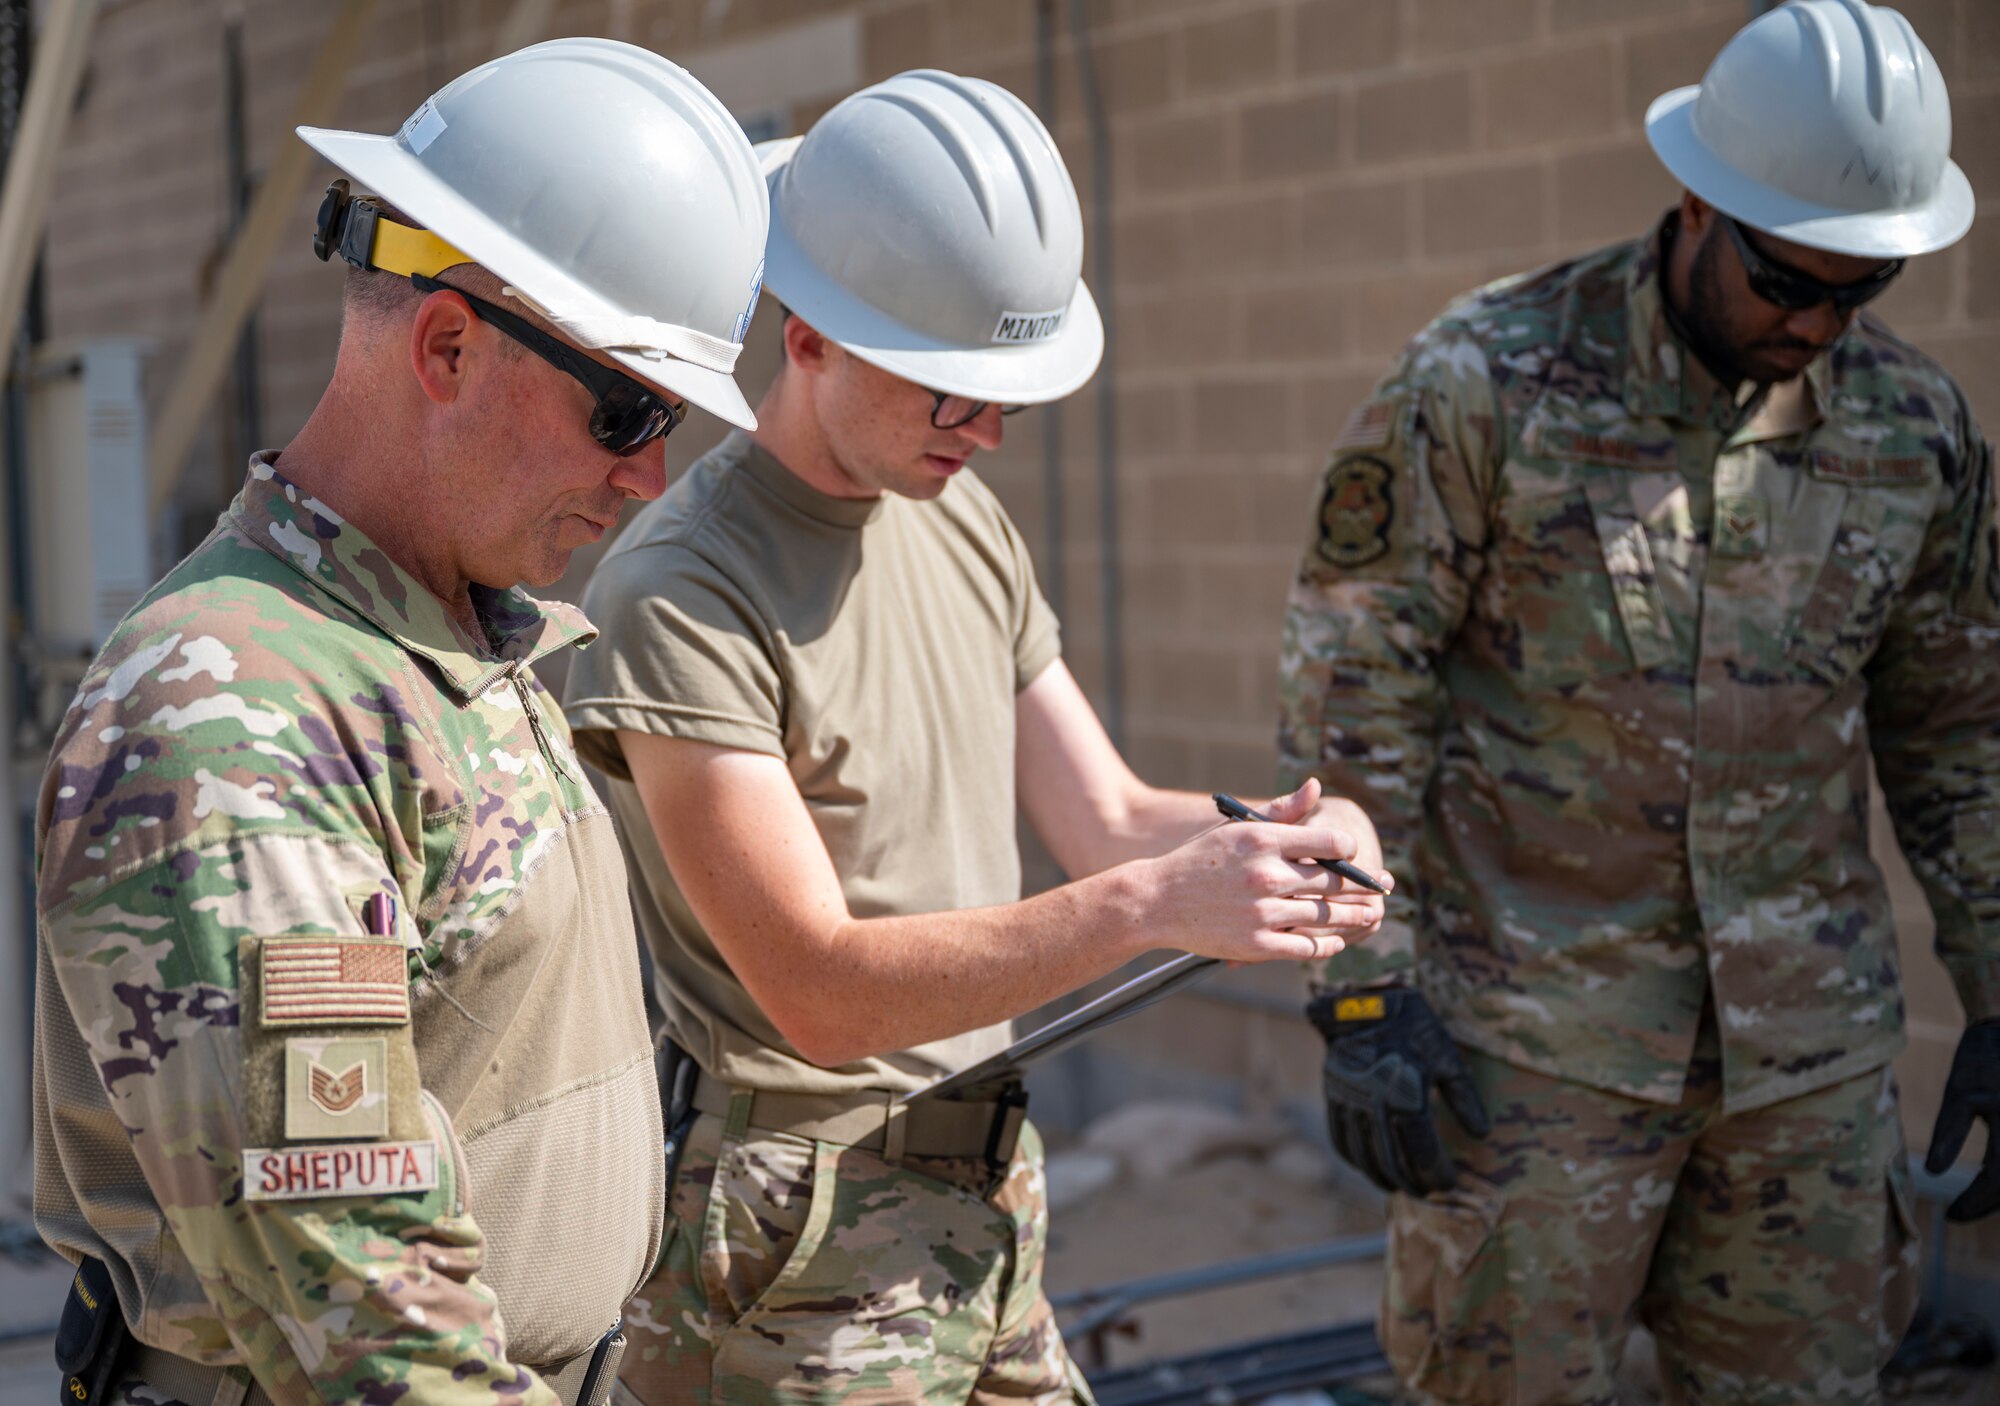 Members of the U.S. Air Forces Central, Air Force Forces A67 Engineering and Installation team observe a communications maintenance hole at Ali Al Salem Air Base, Kuwait, Oct. 19, 2021.